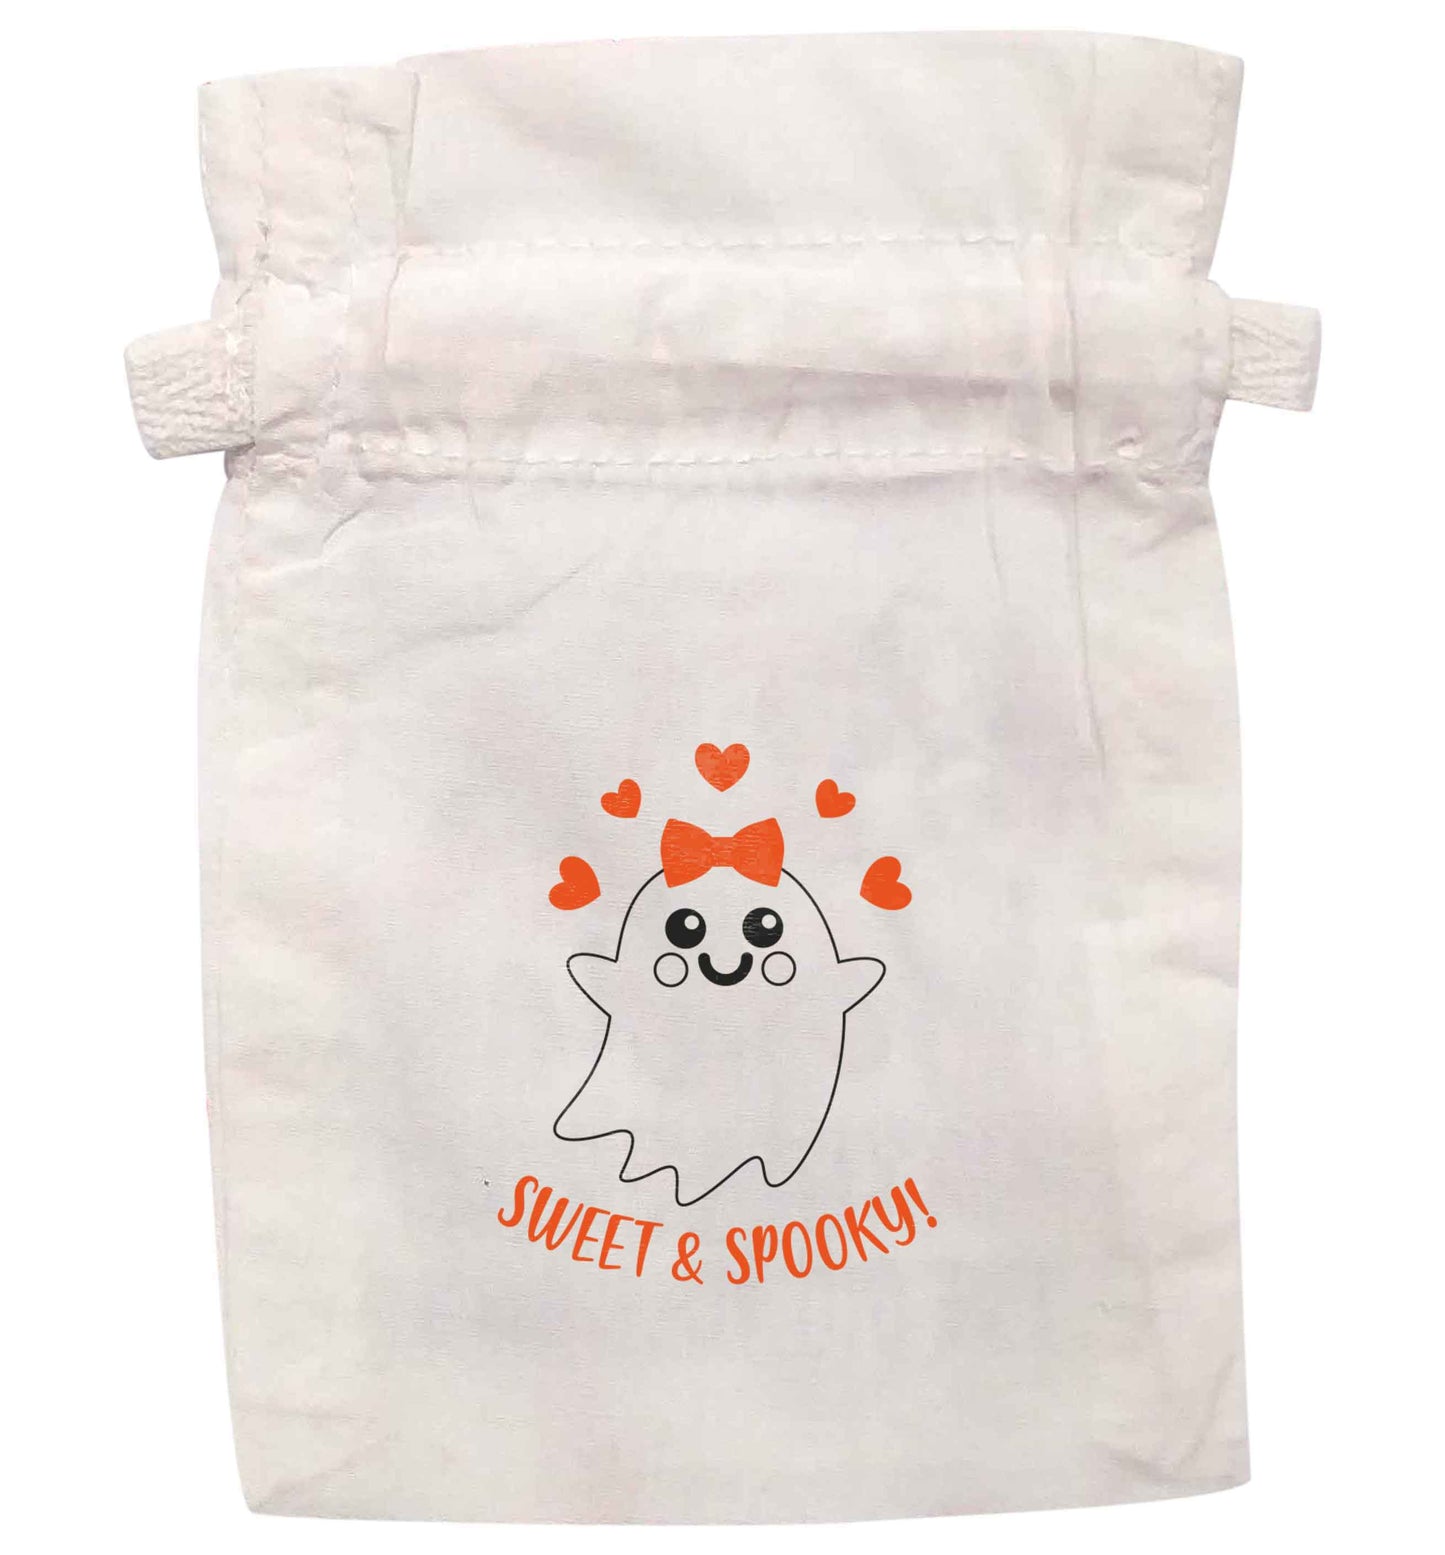 Sweet and spooky | XS - L | Pouch / Drawstring bag / Sack | Organic Cotton | Bulk discounts available!